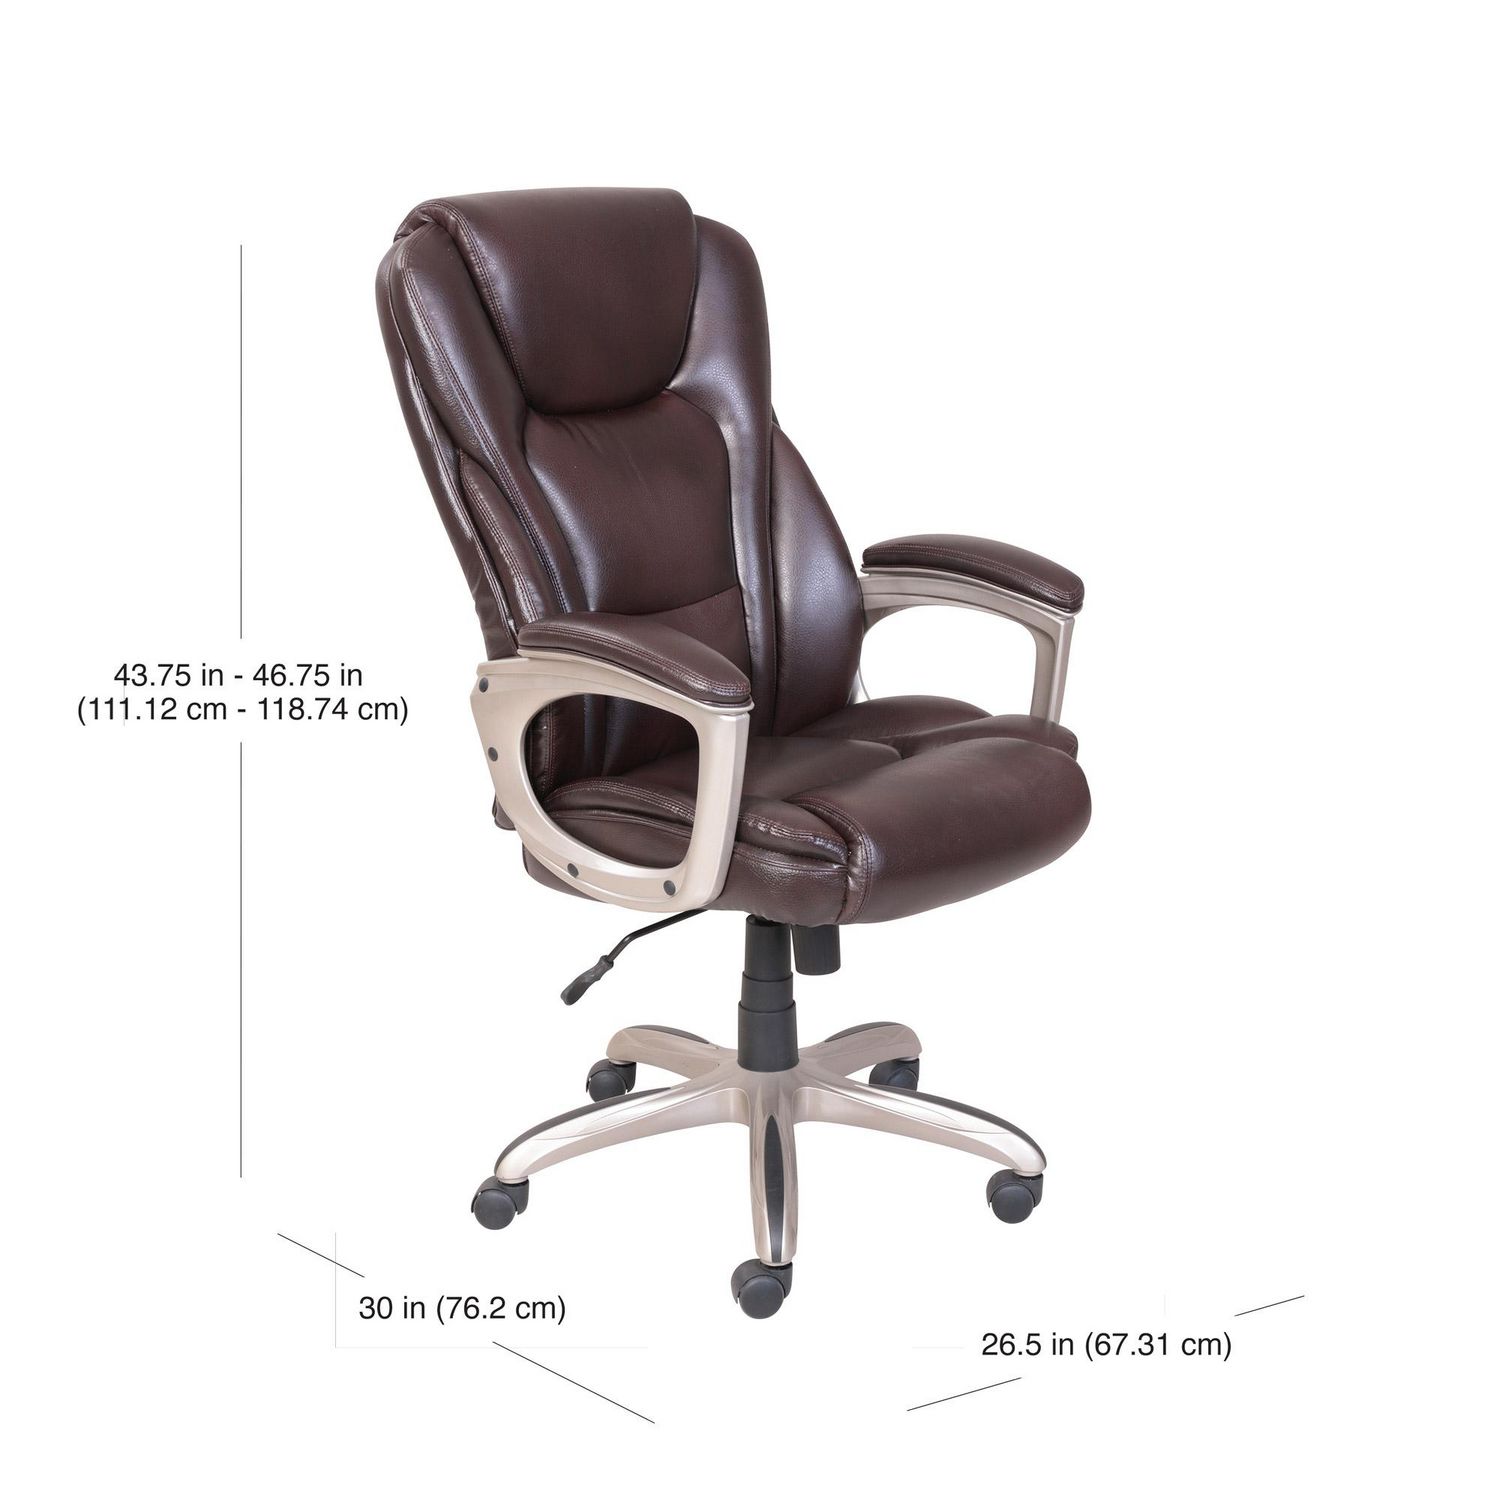 Serta Big & Tall Bonded Leather Commercial Office Chair with Memory Foam,  Brown | Walmart Canada